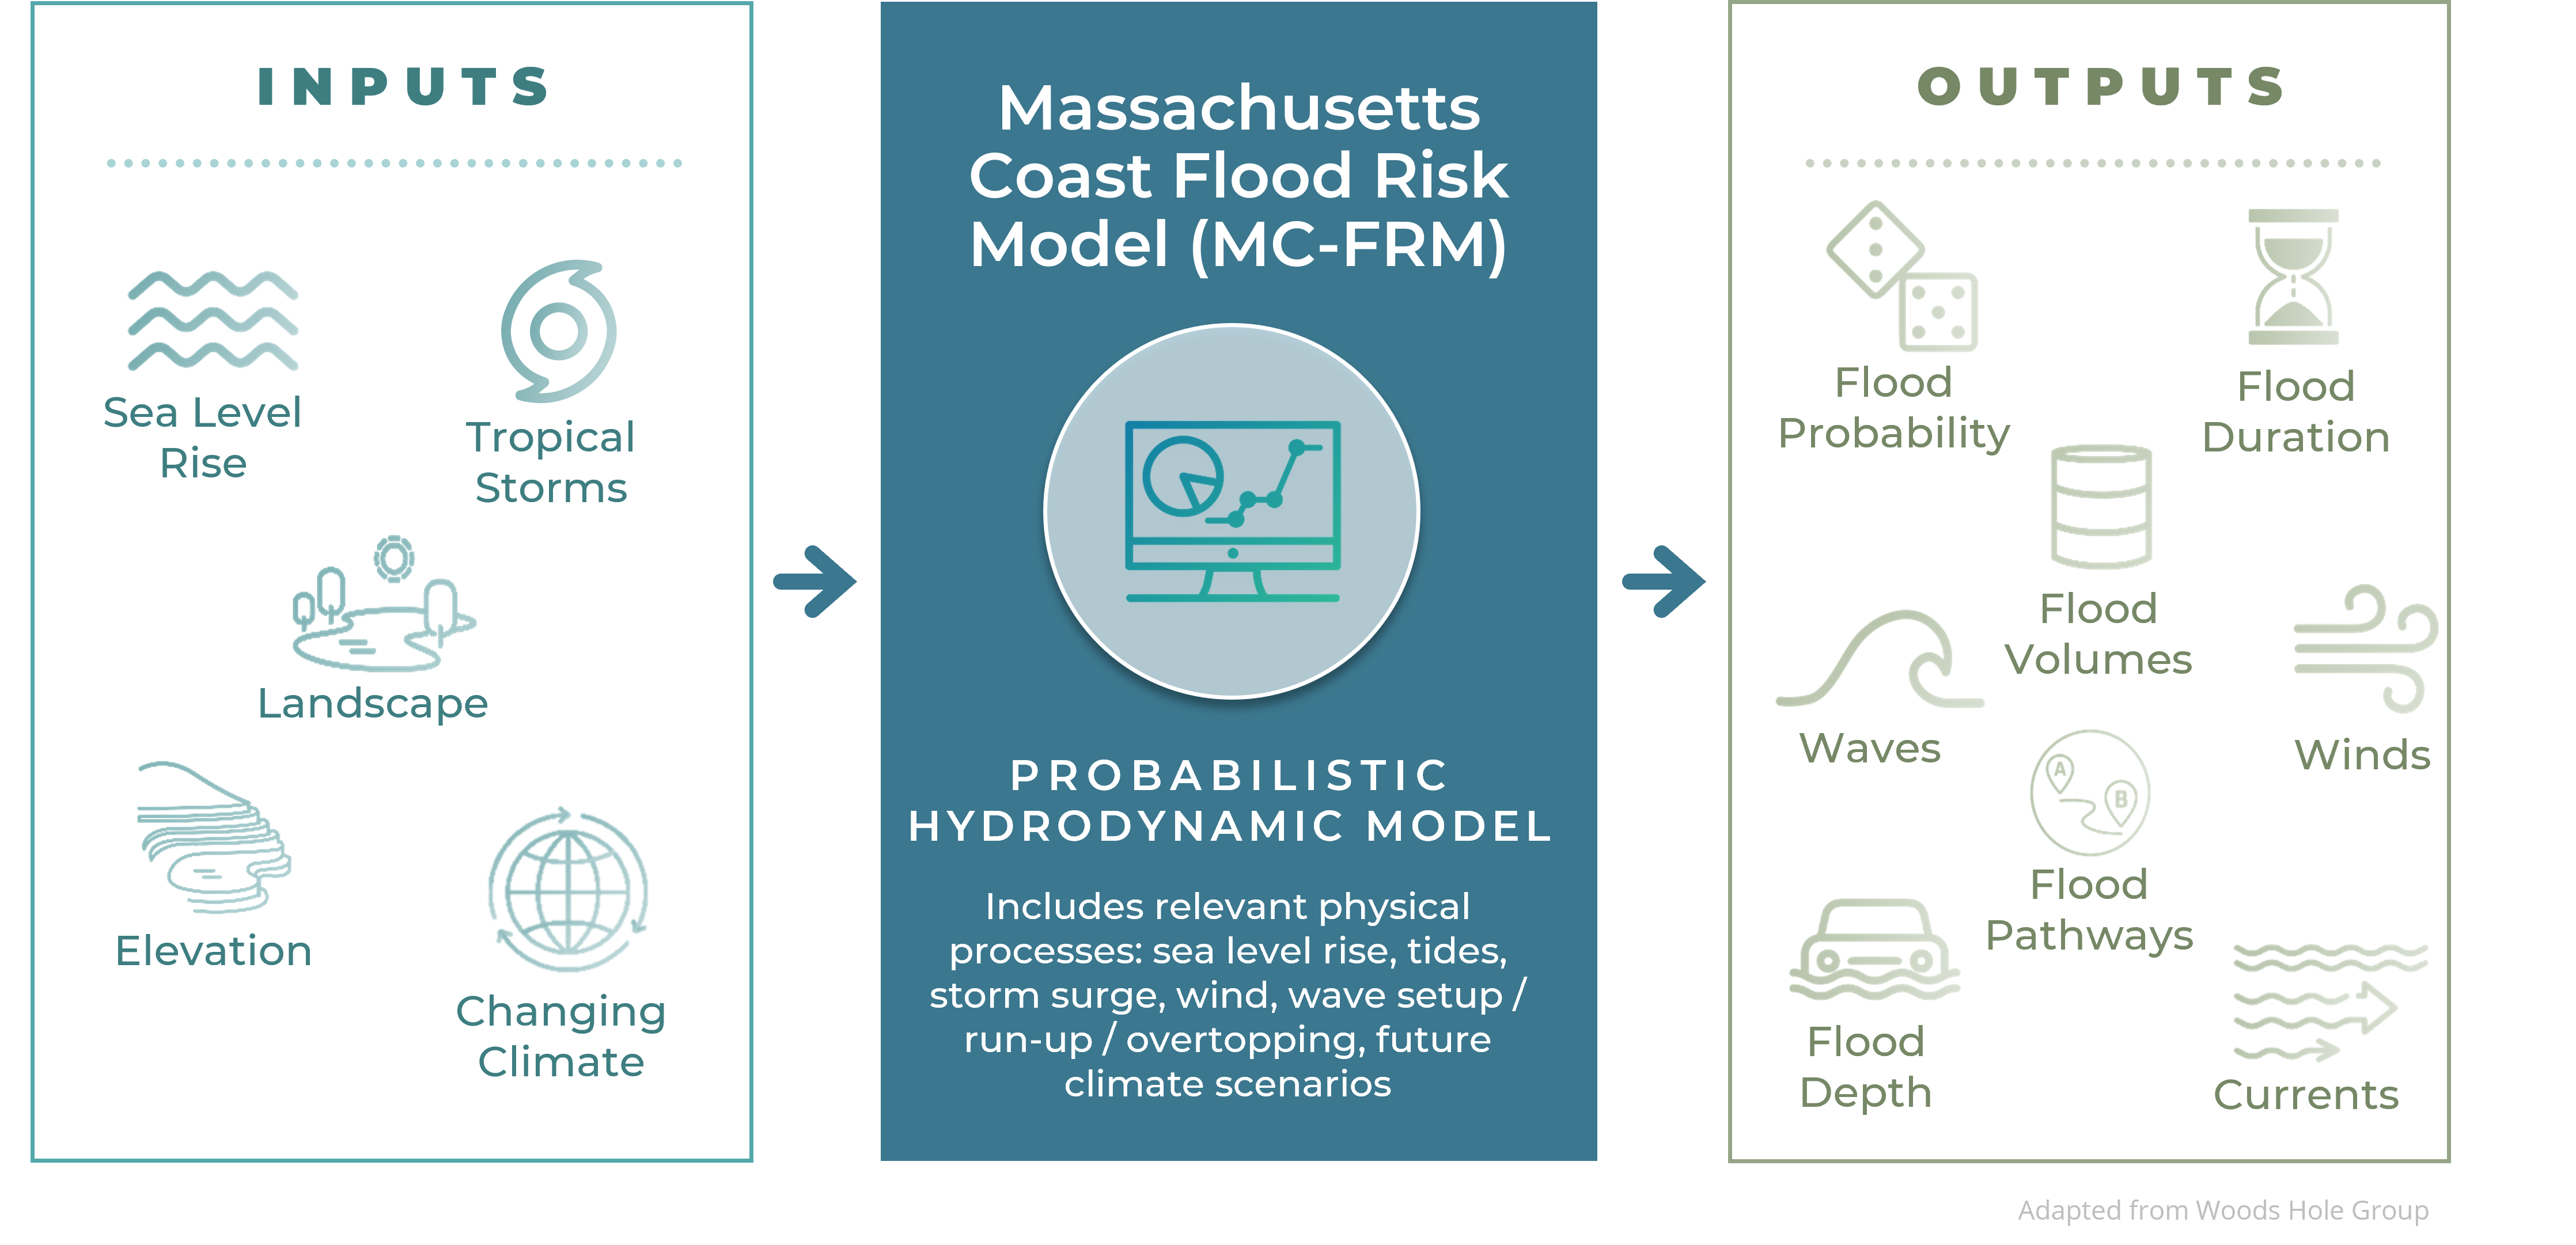 This is a graphic depicting the inputs to the model and outputs. Inputs include sea level rise, tropical storms, landscape, elevation, and changing climate data. Outputs of the probabilistic hydrodynamic model include flood probability, flood duration, flood volumes, waves, winds, flood pathways, flood depth, and currents.